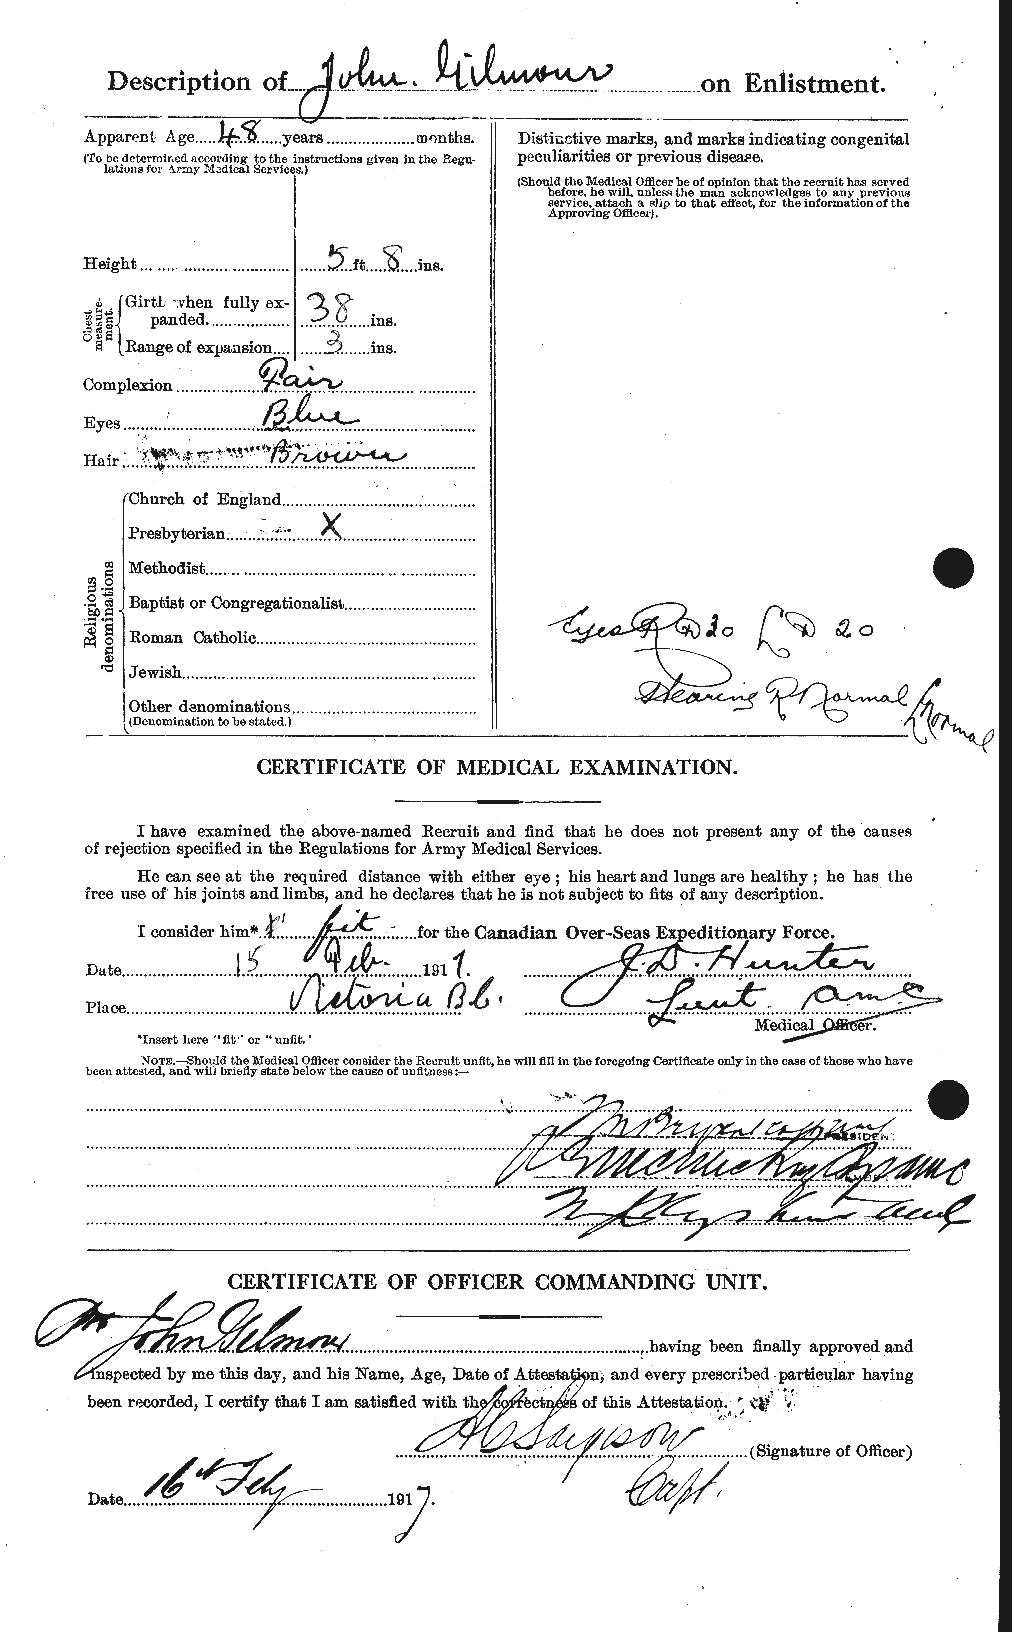 Personnel Records of the First World War - CEF 350968b